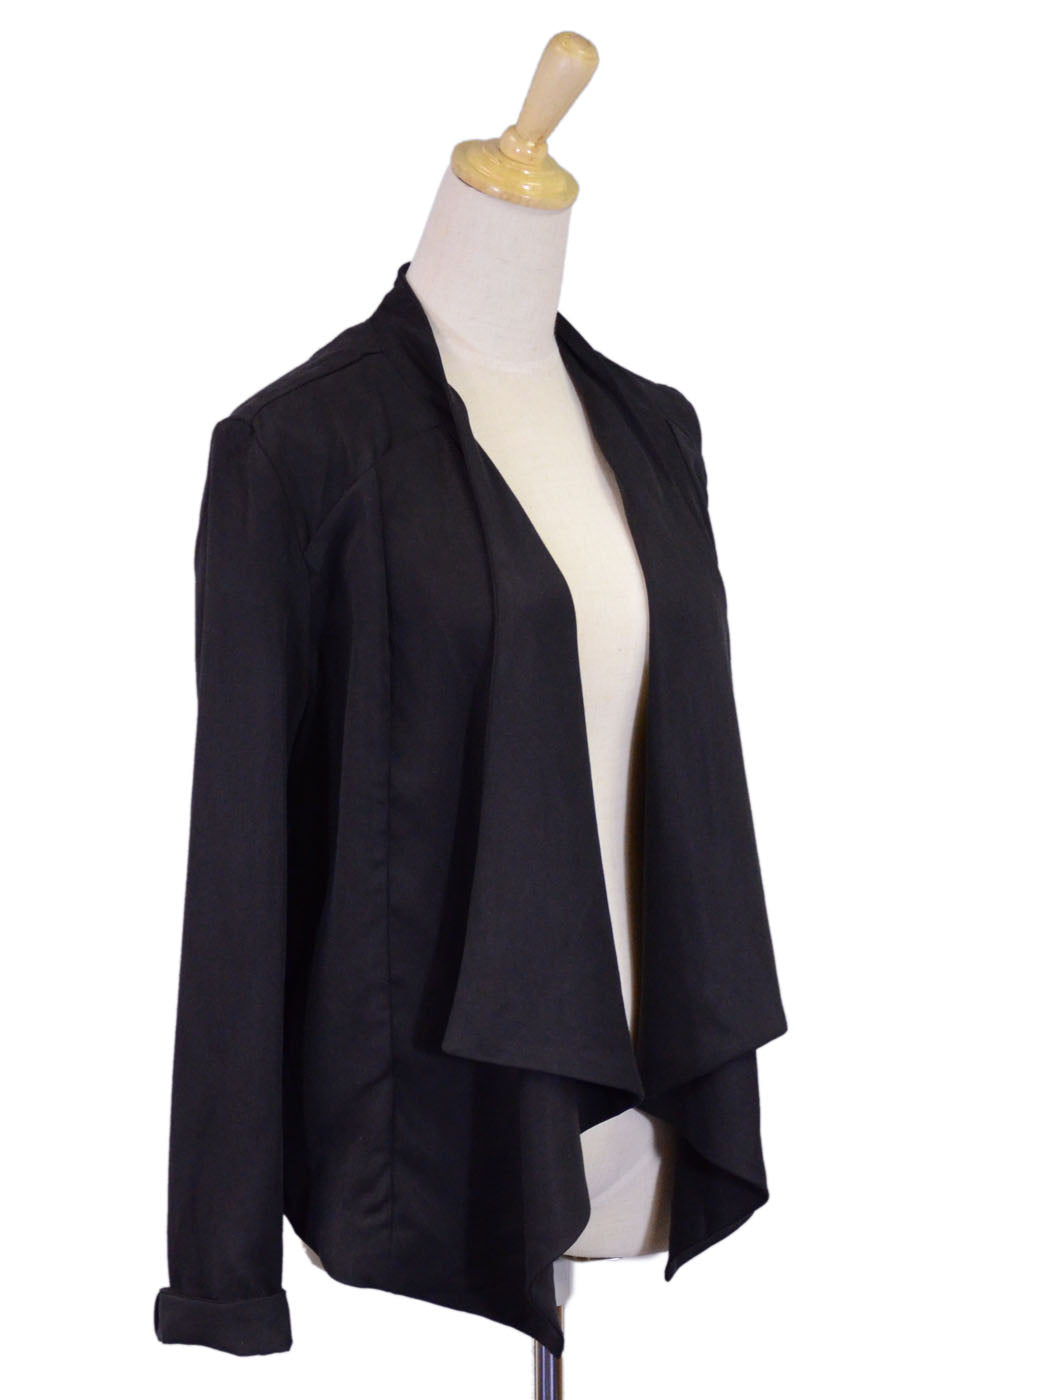 Gentle Fawn Draped Long Sleeved Heavy Weight Blazer With Back Lace Design - ALILANG.COM